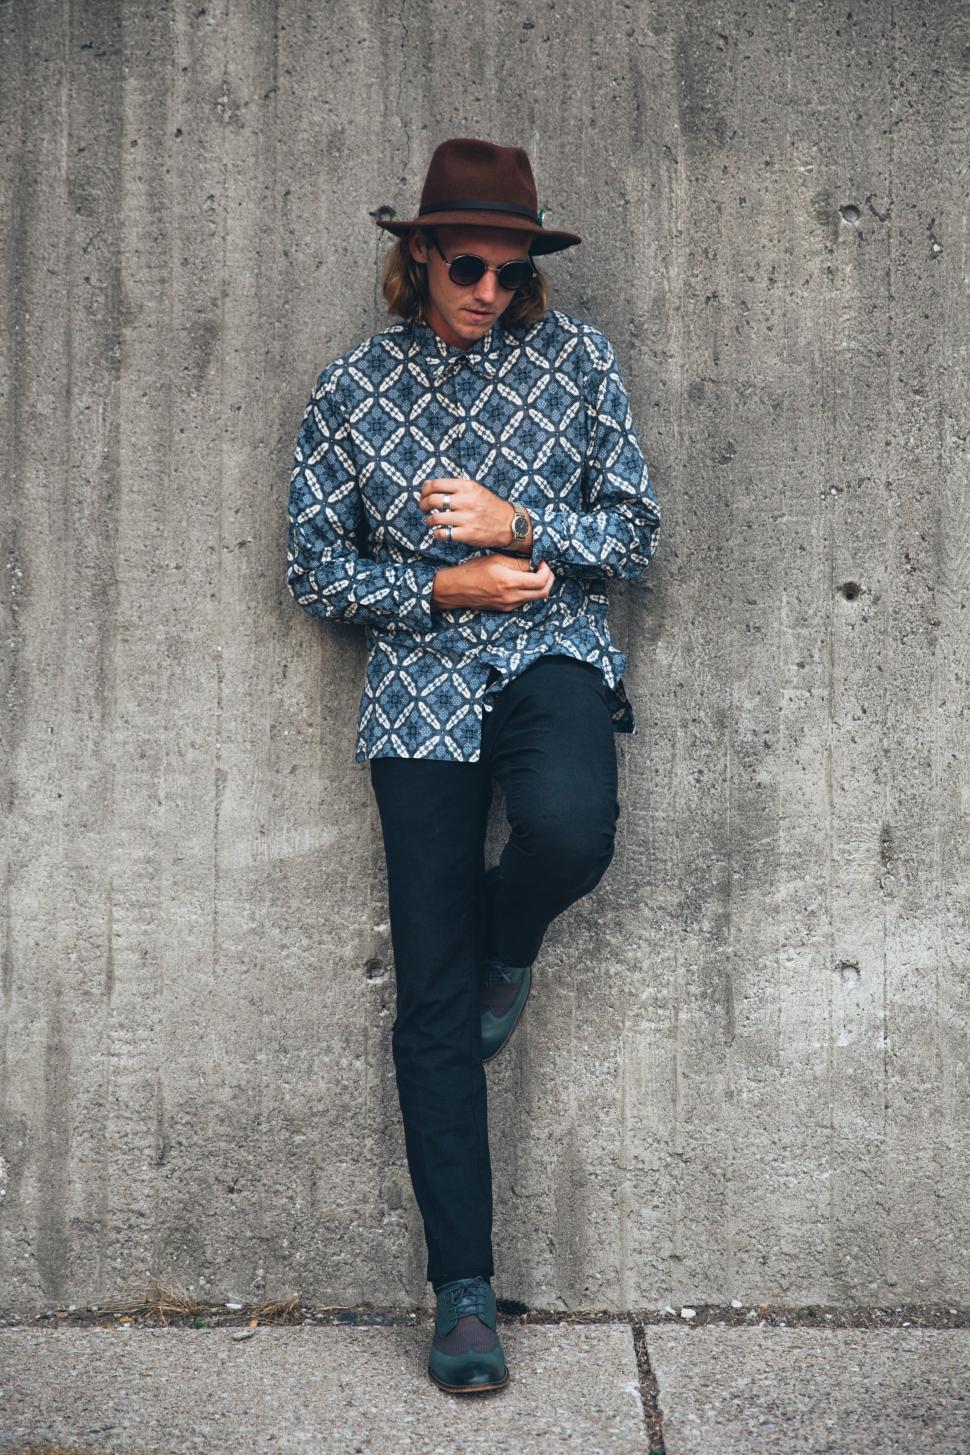 Free Image of A young man wearing patterned shirt posing outdoors 